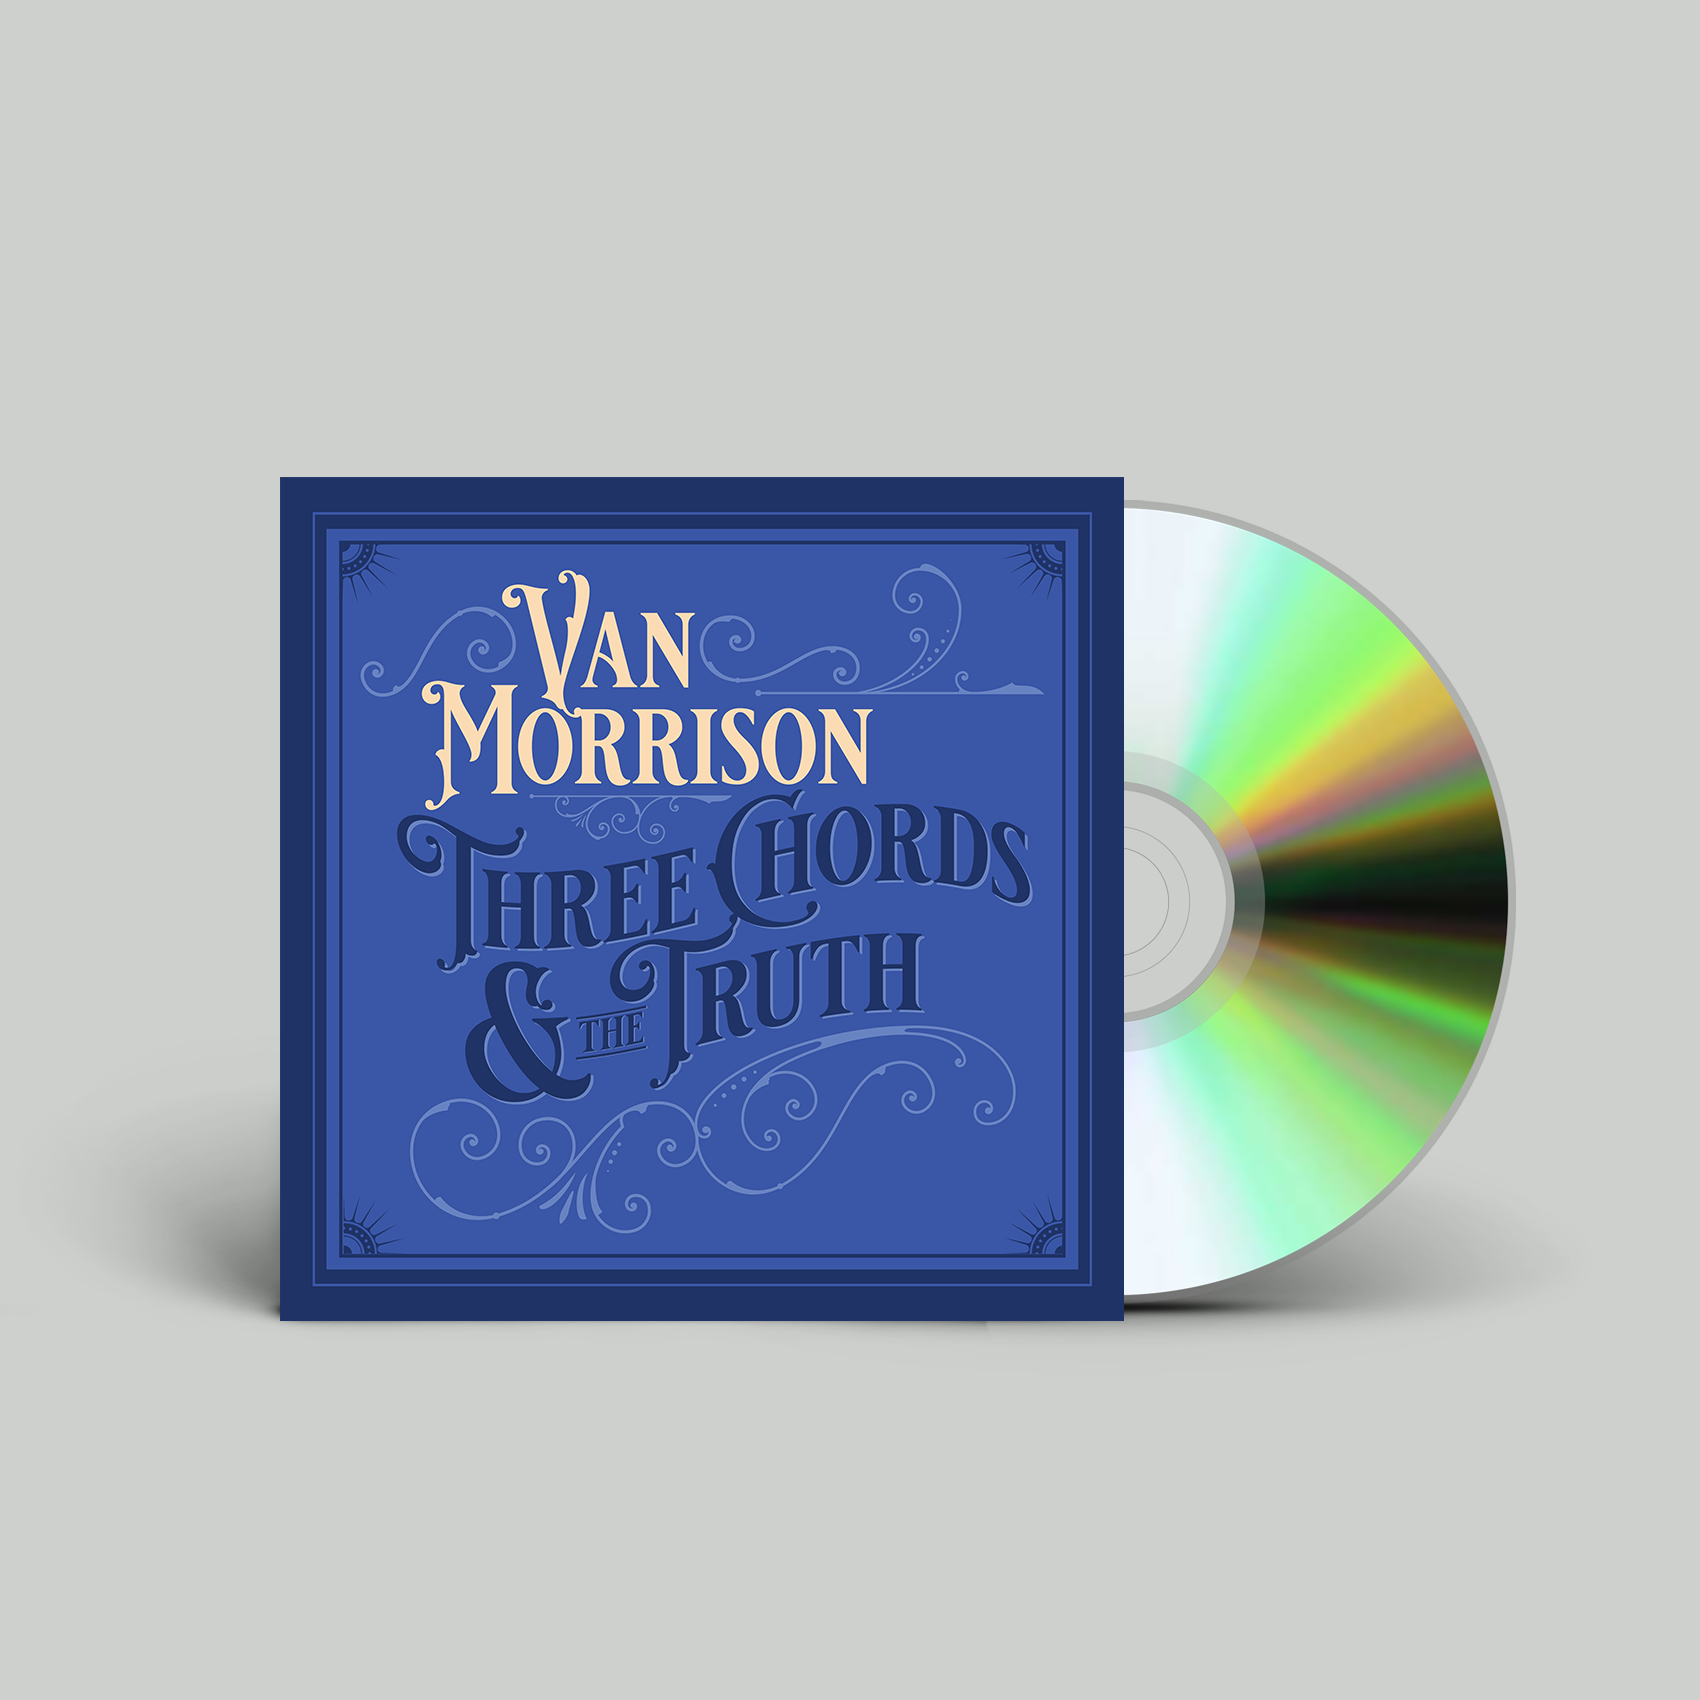 Van Morrison - Three Chords And The Truth: CD